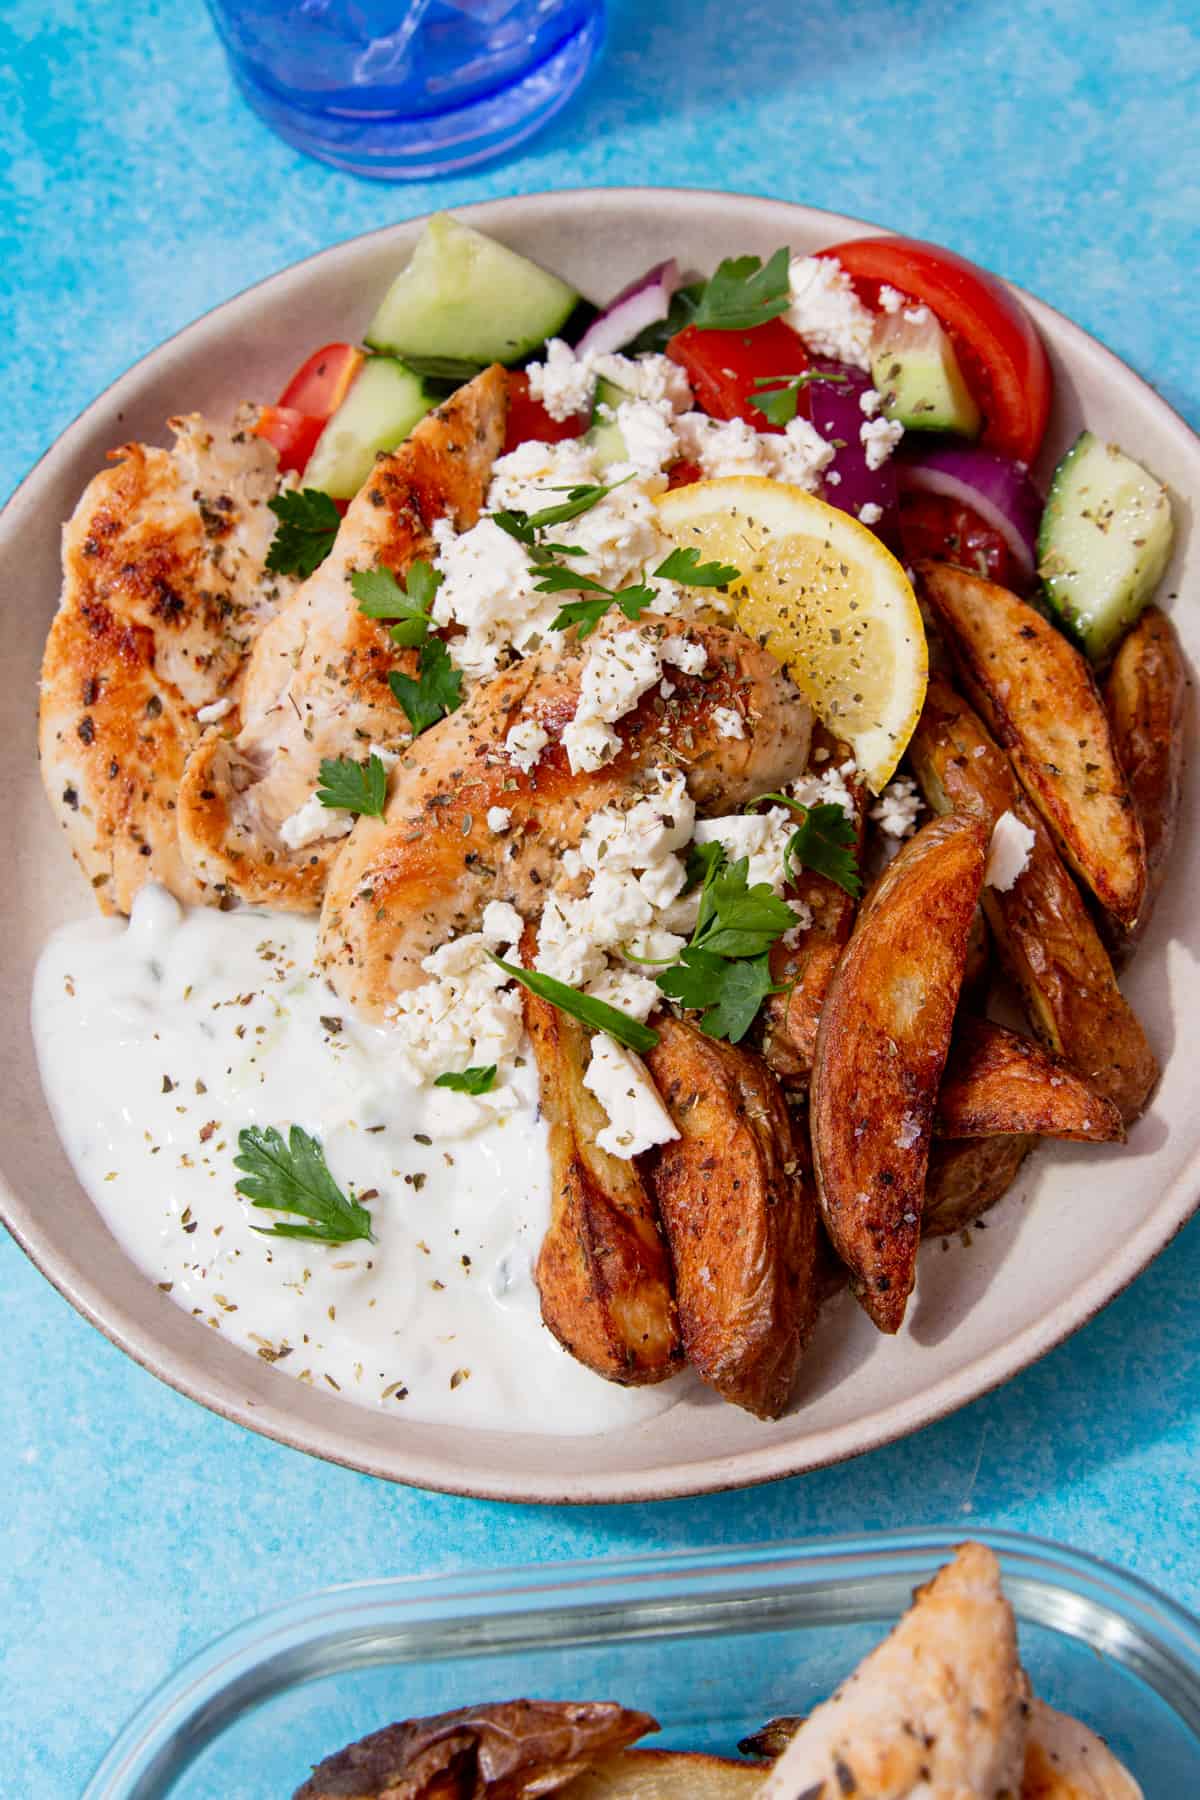 A bowl of salad with golden browned chicken pieces, fries, tzatziki, topped with feta and a wedge of lemon.